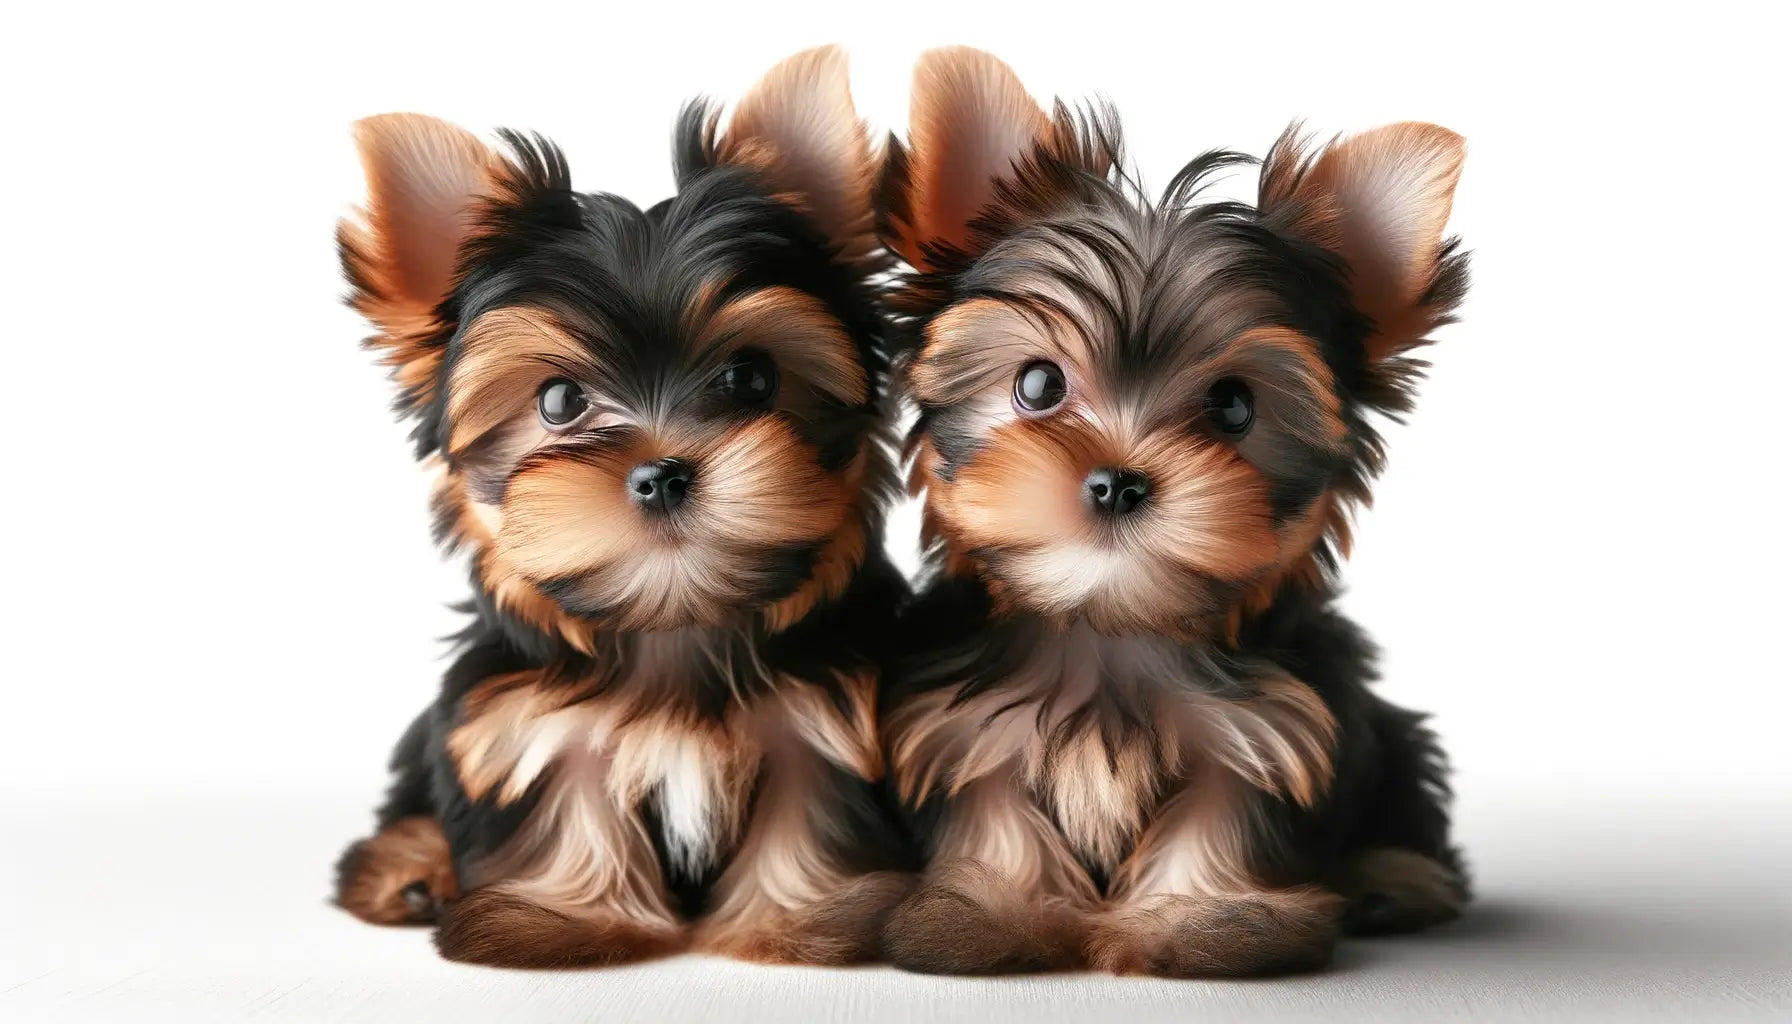 Two Teacup Yorkies sitting side by side, showcasing their miniature frames and youthful expressions.